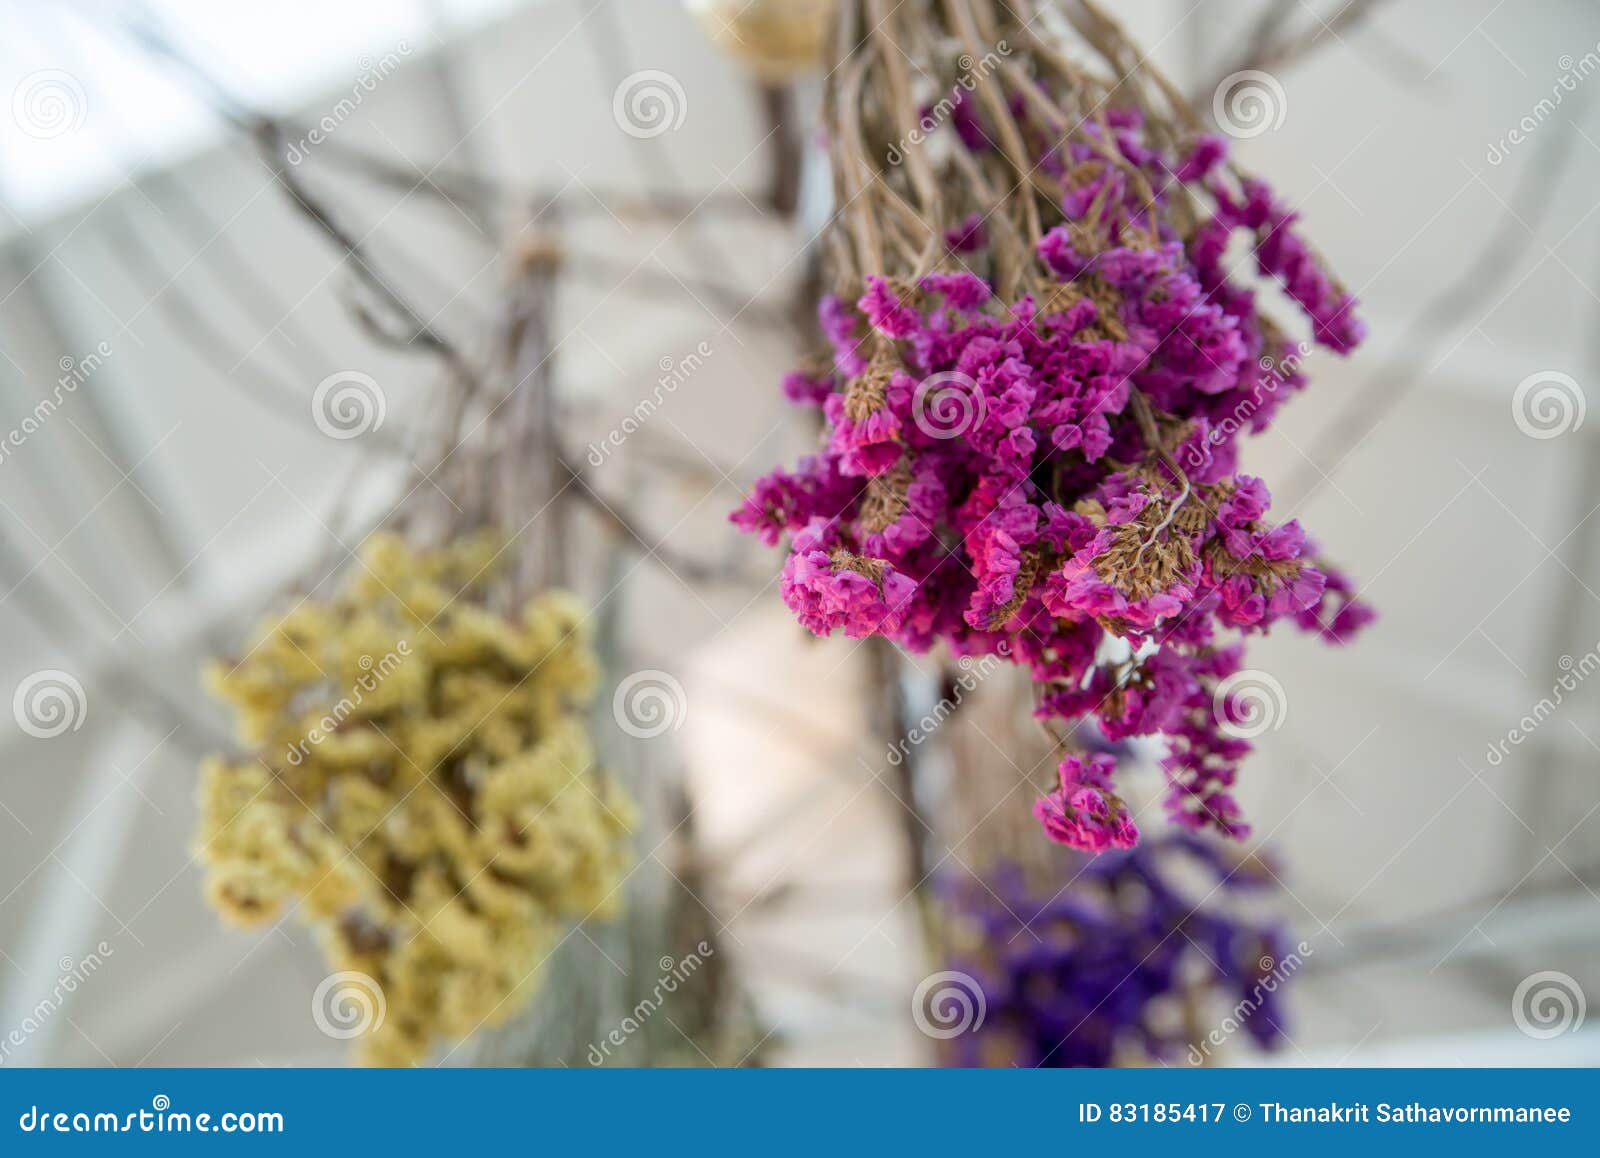 Dried Flowers Hanging From A Ceiling Stock Image Image Of Retro Lines 83185417